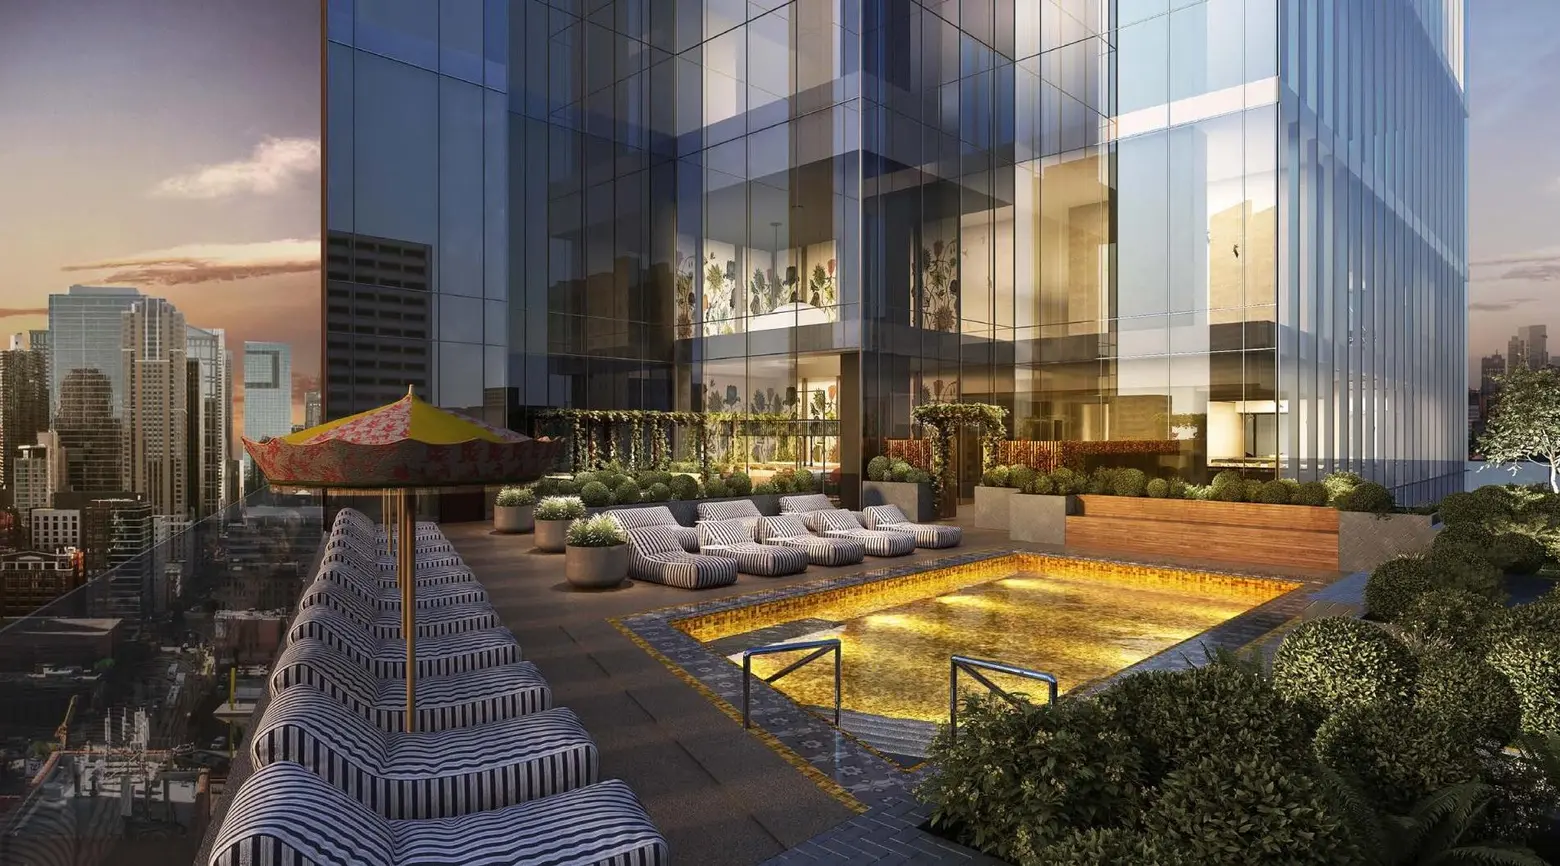 Nomad’s glassy Virgin Hotel will have a rooftop pool and bar